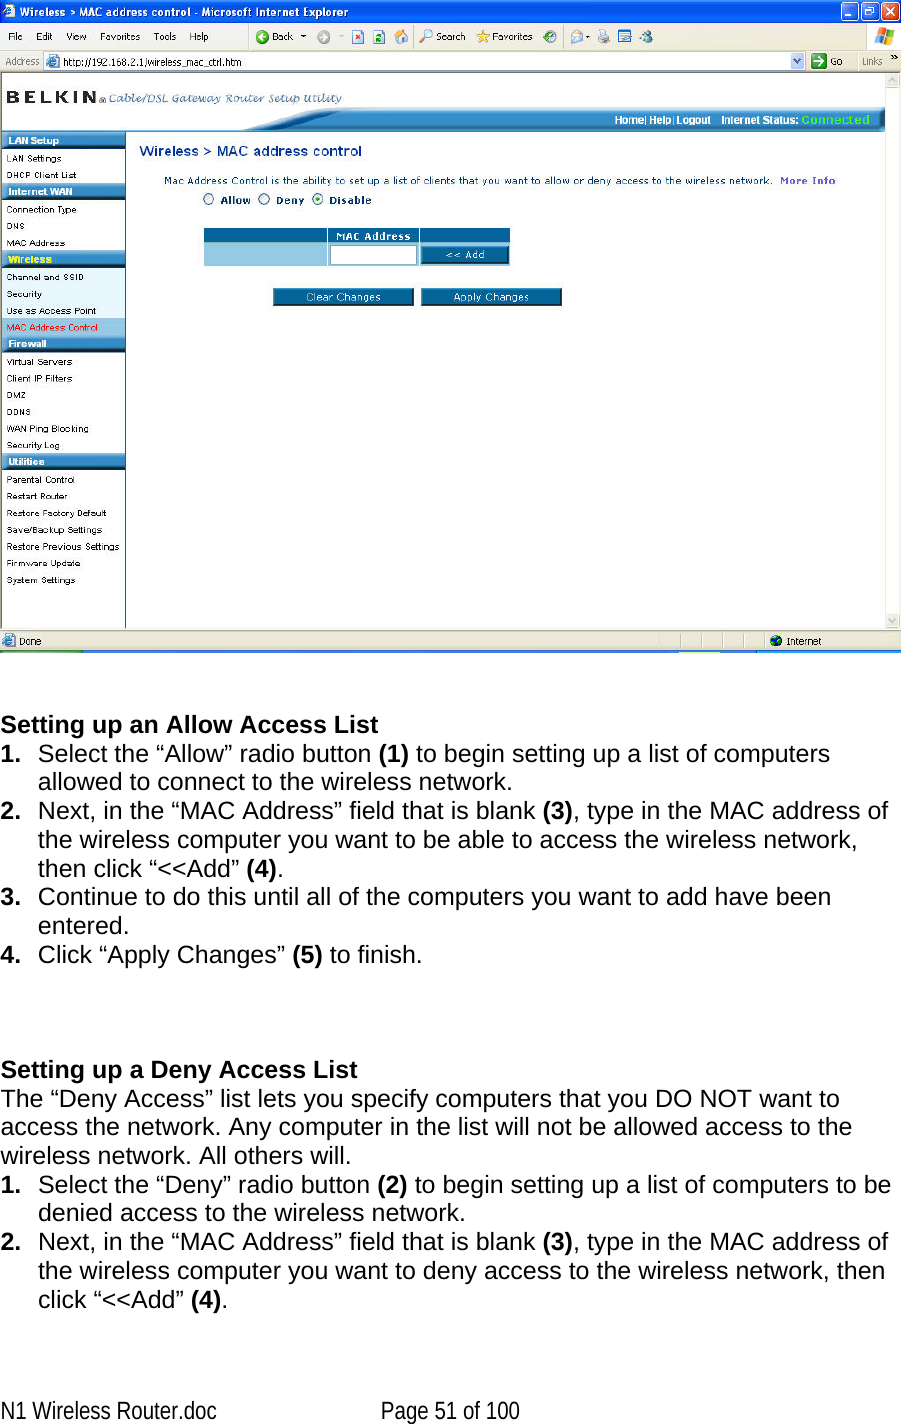      Setting up an Allow Access List 1.  Select the “Allow” radio button (1) to begin setting up a list of computers allowed to connect to the wireless network.  2.  Next, in the “MAC Address” field that is blank (3), type in the MAC address of the wireless computer you want to be able to access the wireless network, then click “&lt;&lt;Add” (4).  3.  Continue to do this until all of the computers you want to add have been entered.  4.  Click “Apply Changes” (5) to finish.    Setting up a Deny Access List The “Deny Access” list lets you specify computers that you DO NOT want to access the network. Any computer in the list will not be allowed access to the wireless network. All others will. 1.  Select the “Deny” radio button (2) to begin setting up a list of computers to be denied access to the wireless network.  2.  Next, in the “MAC Address” field that is blank (3), type in the MAC address of the wireless computer you want to deny access to the wireless network, then click “&lt;&lt;Add” (4).  N1 Wireless Router.doc  Page 51 of 100 